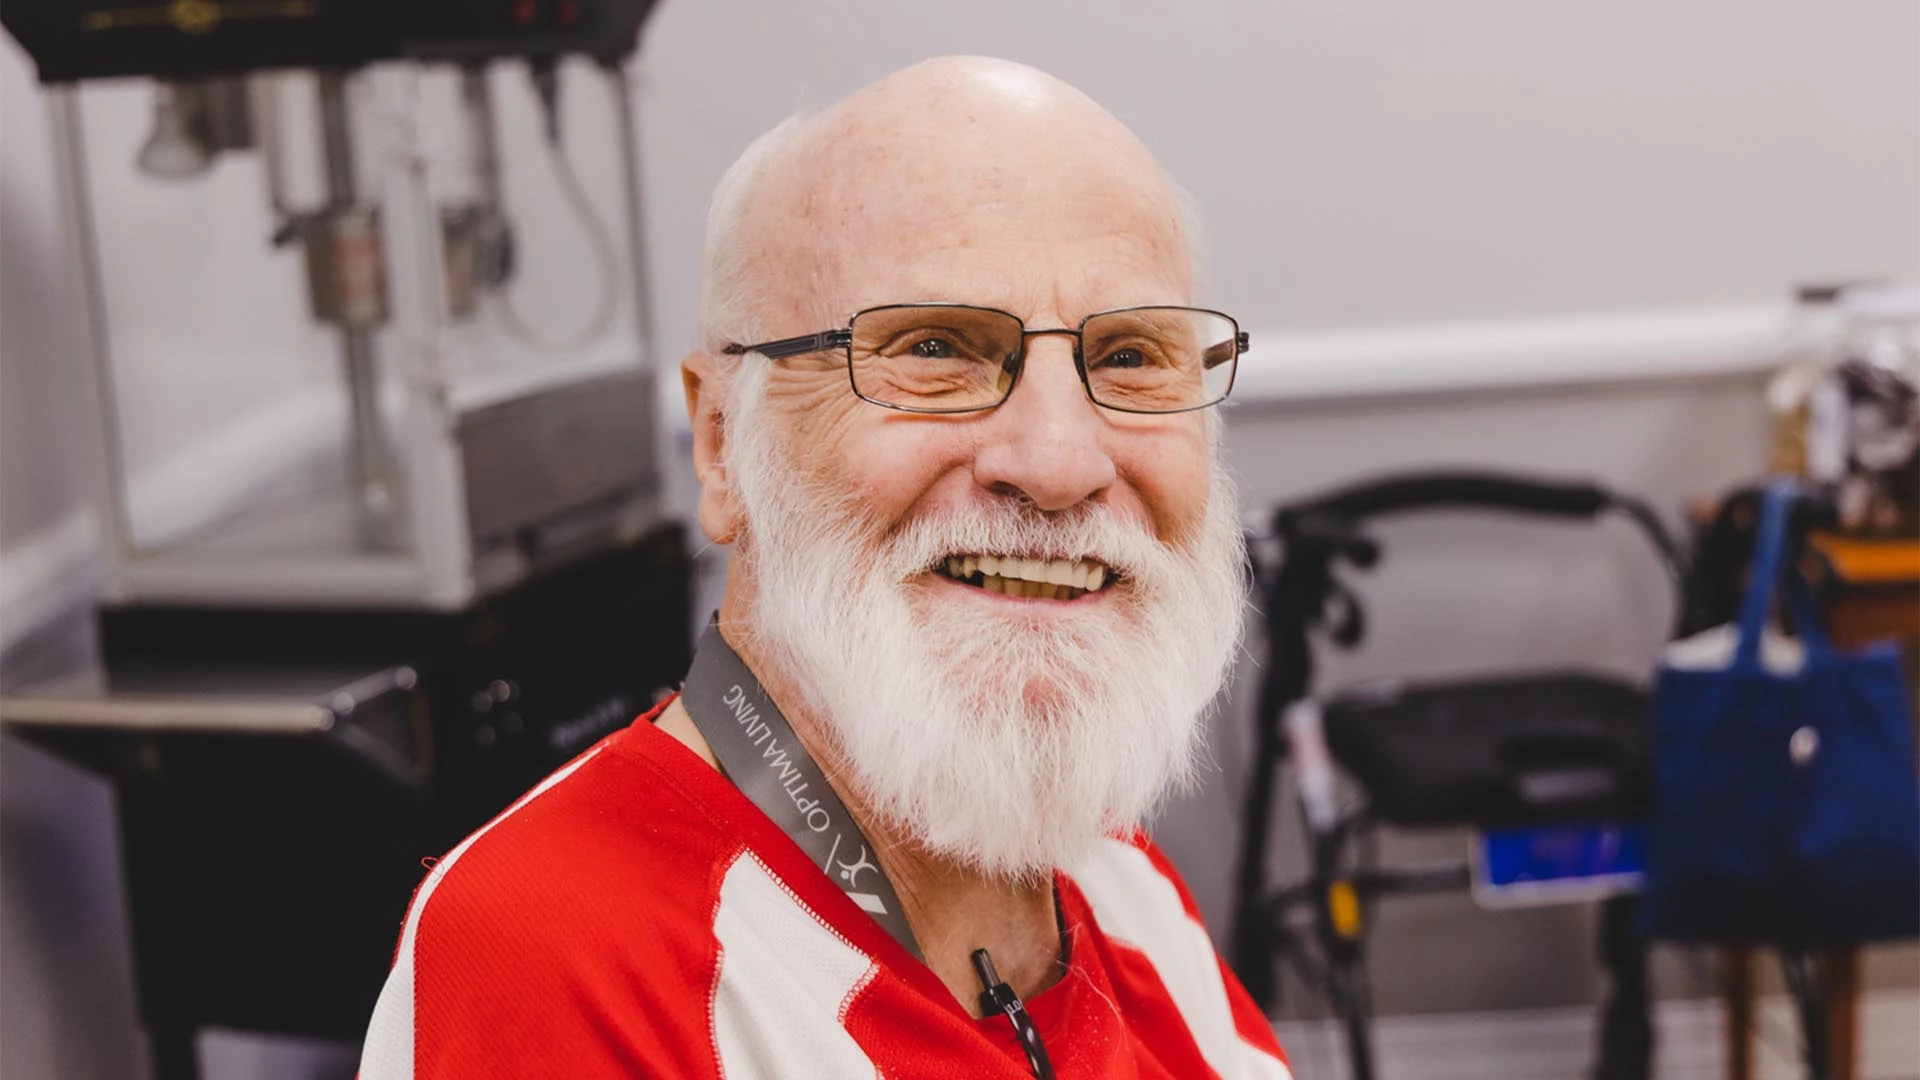 Man with glasses smiling in a retirement home